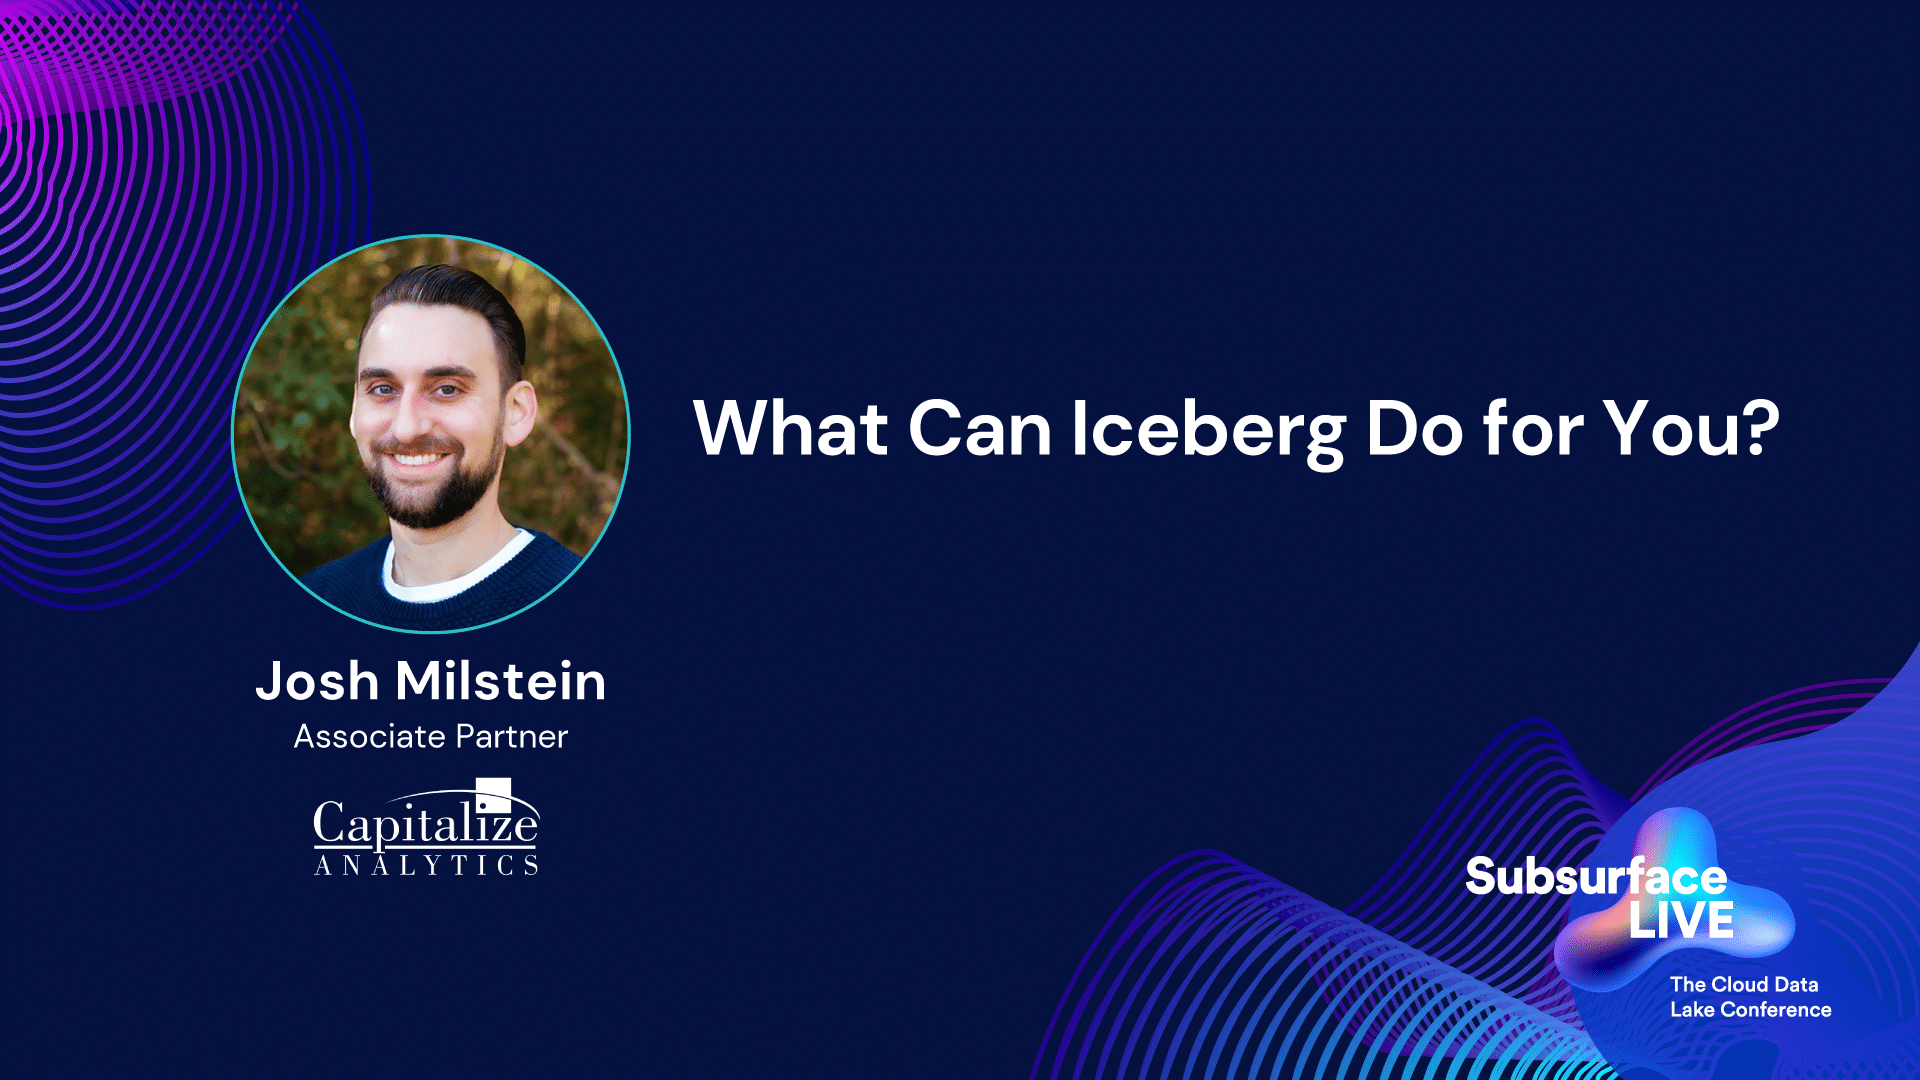 What Can Iceberg Do for You?